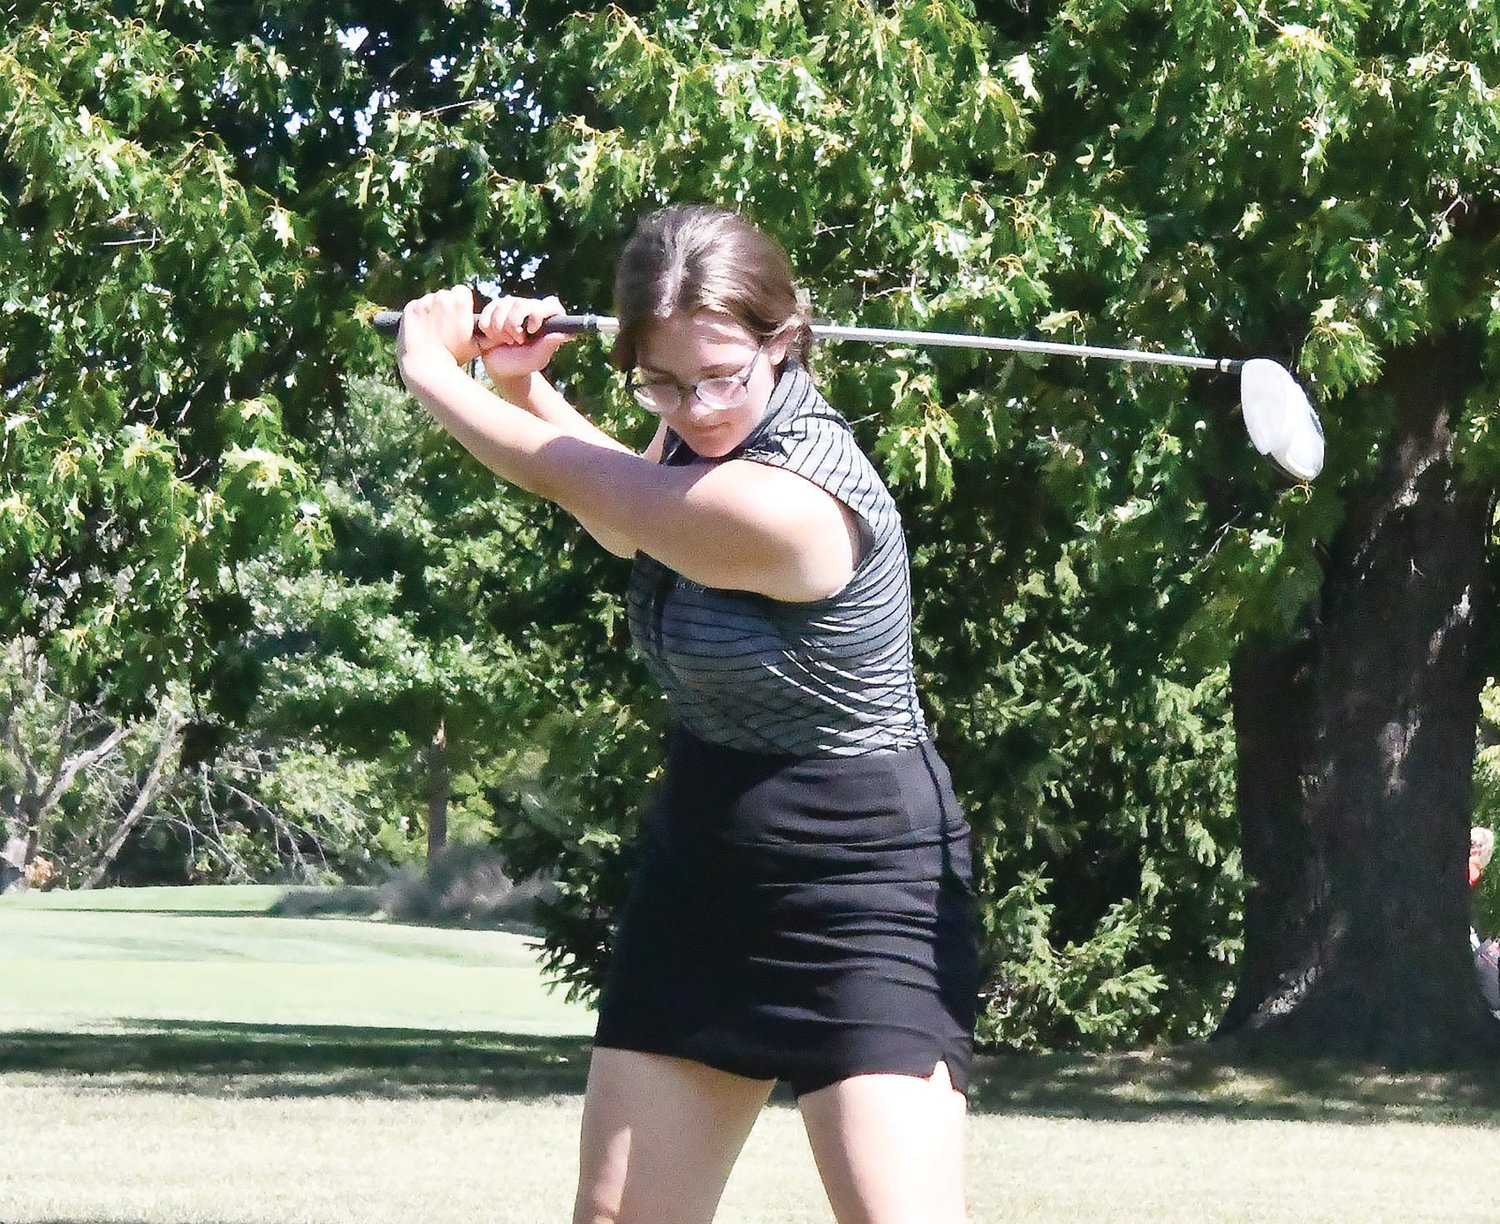 Cairo's Addison Pollard prepares to drive the ball during Tuesday's scramble tournament in Columbia. Harrisburg School District served as the host.